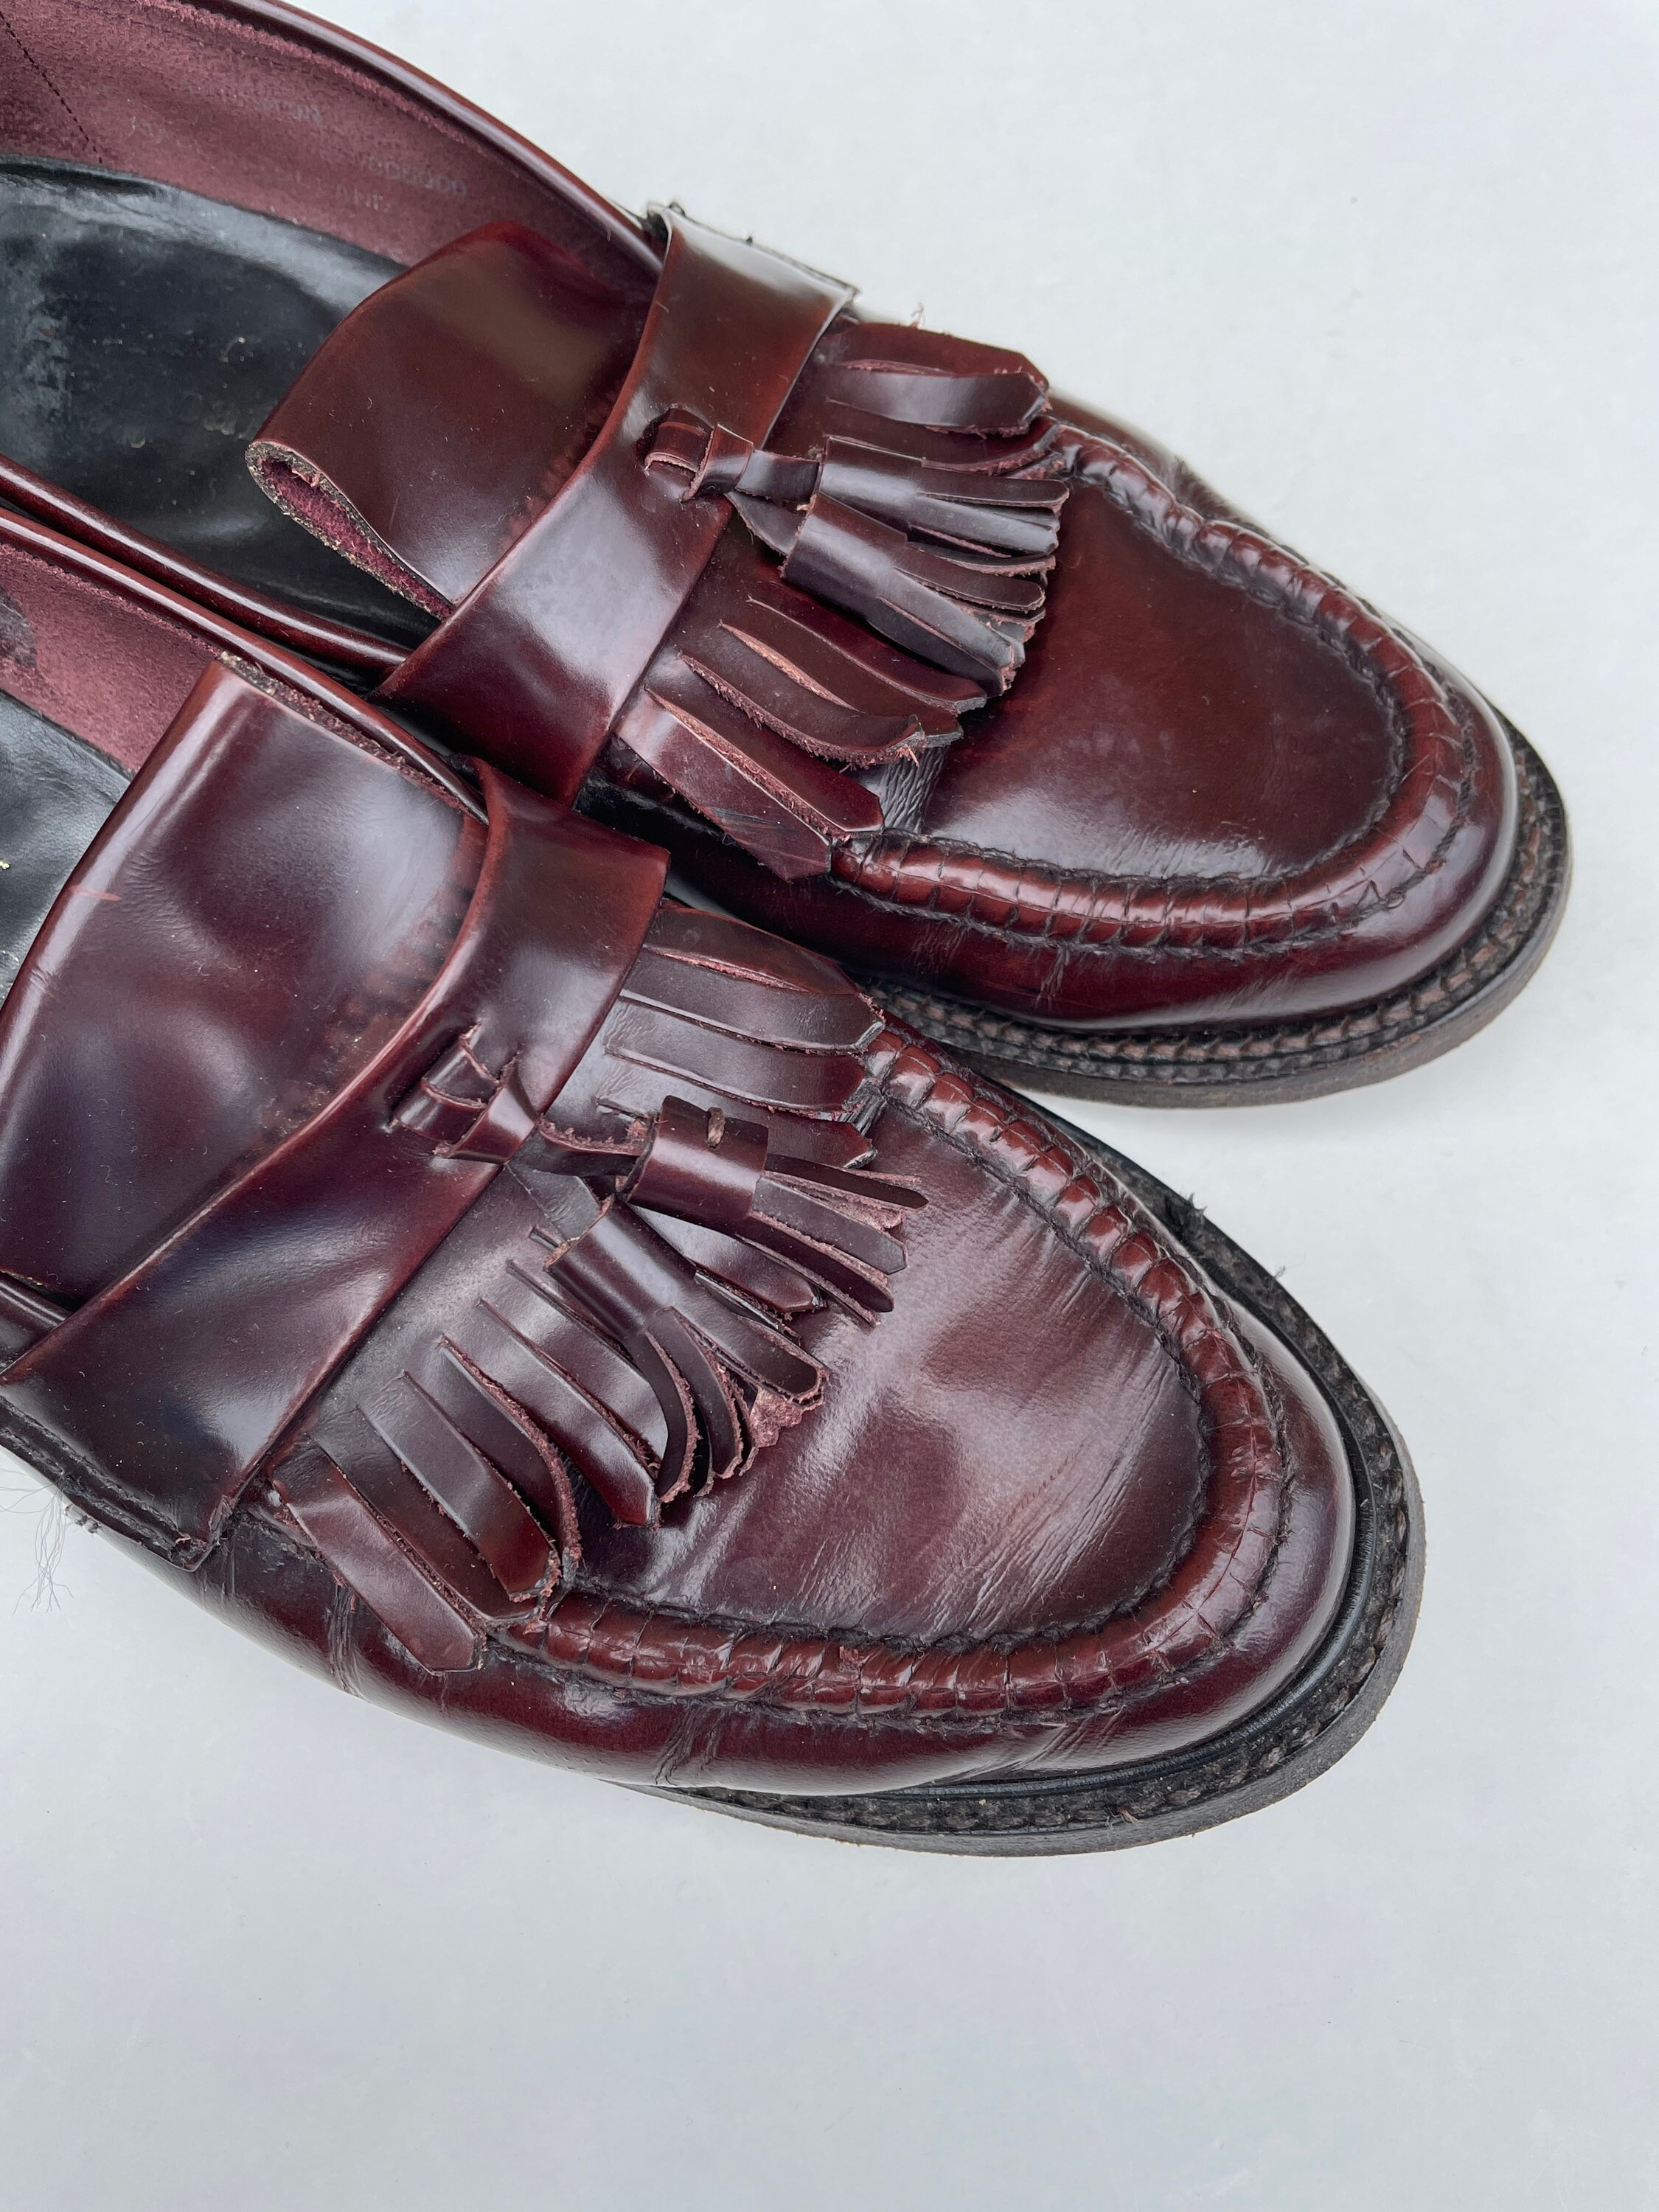 Vintage Loake Loafers in Oxblood Red Leather | Etsy